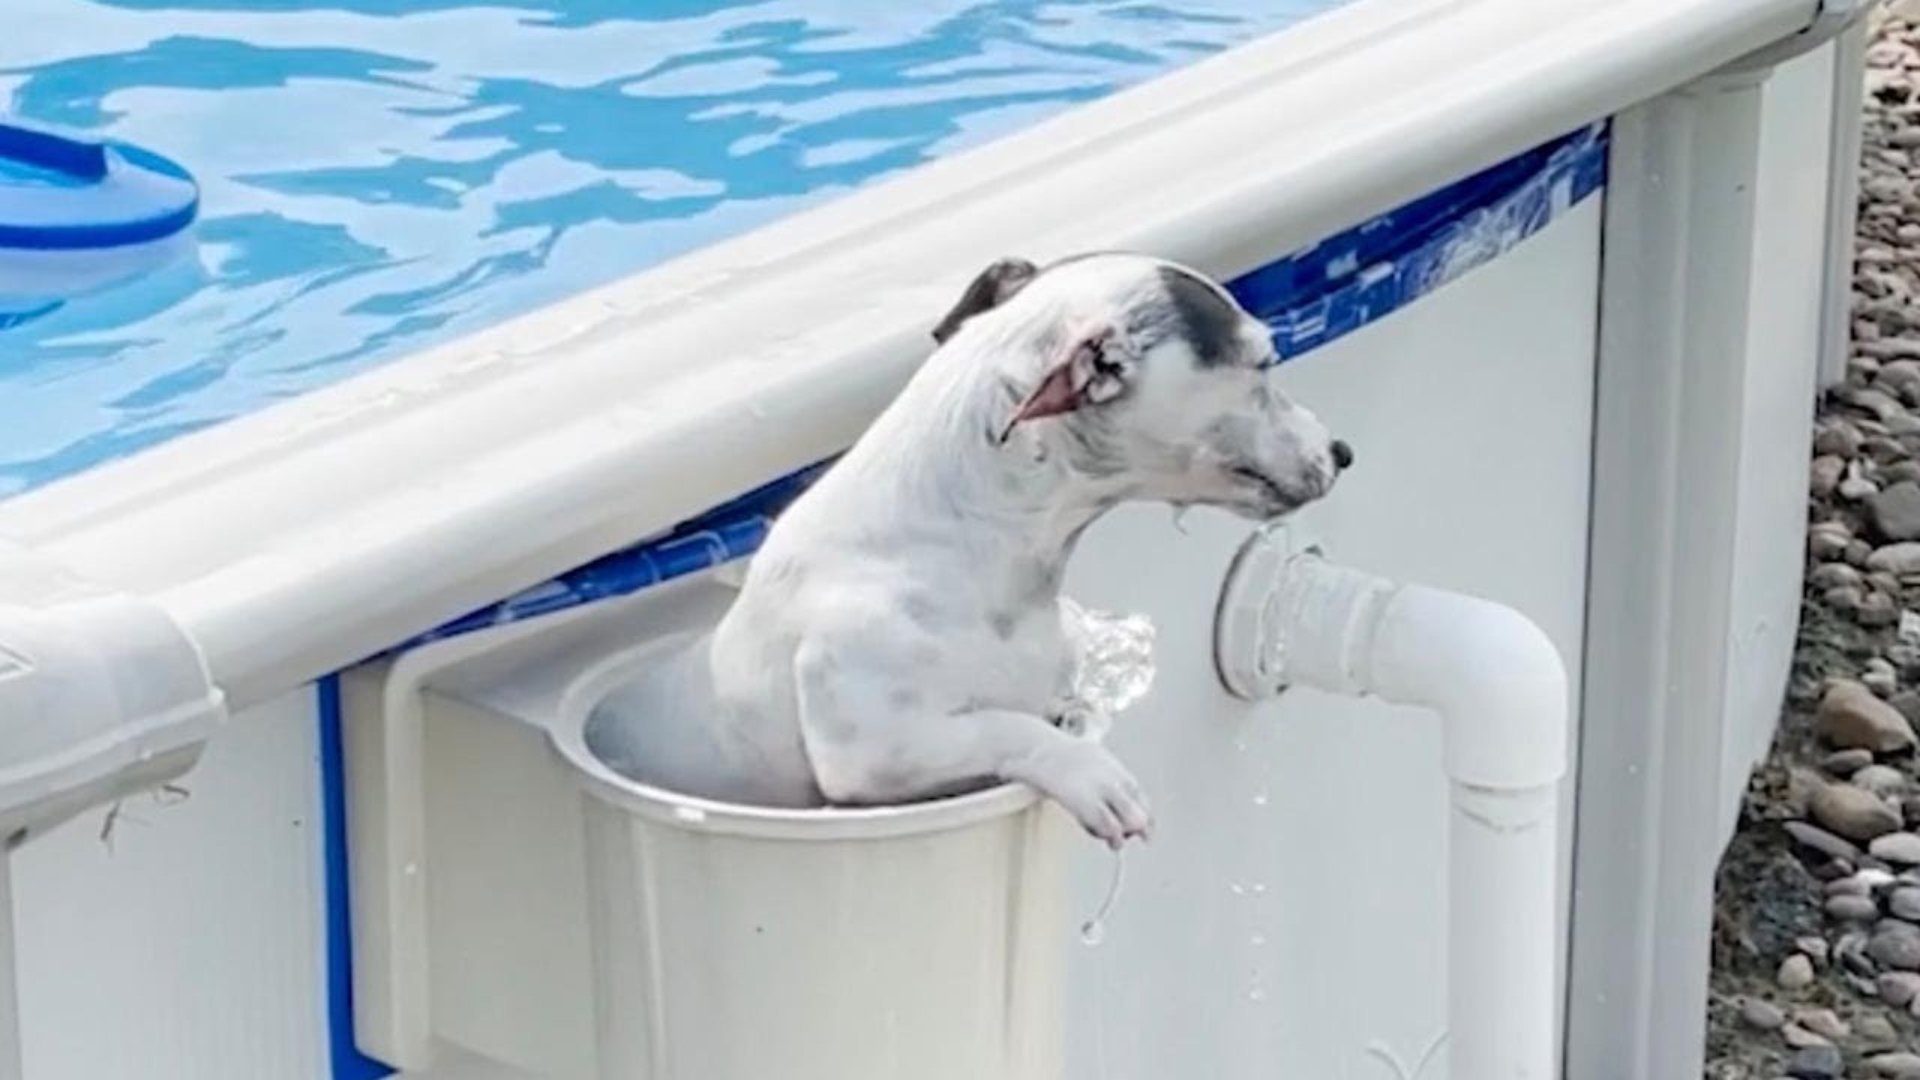 This dog has a creative way of getting in and out of the pool